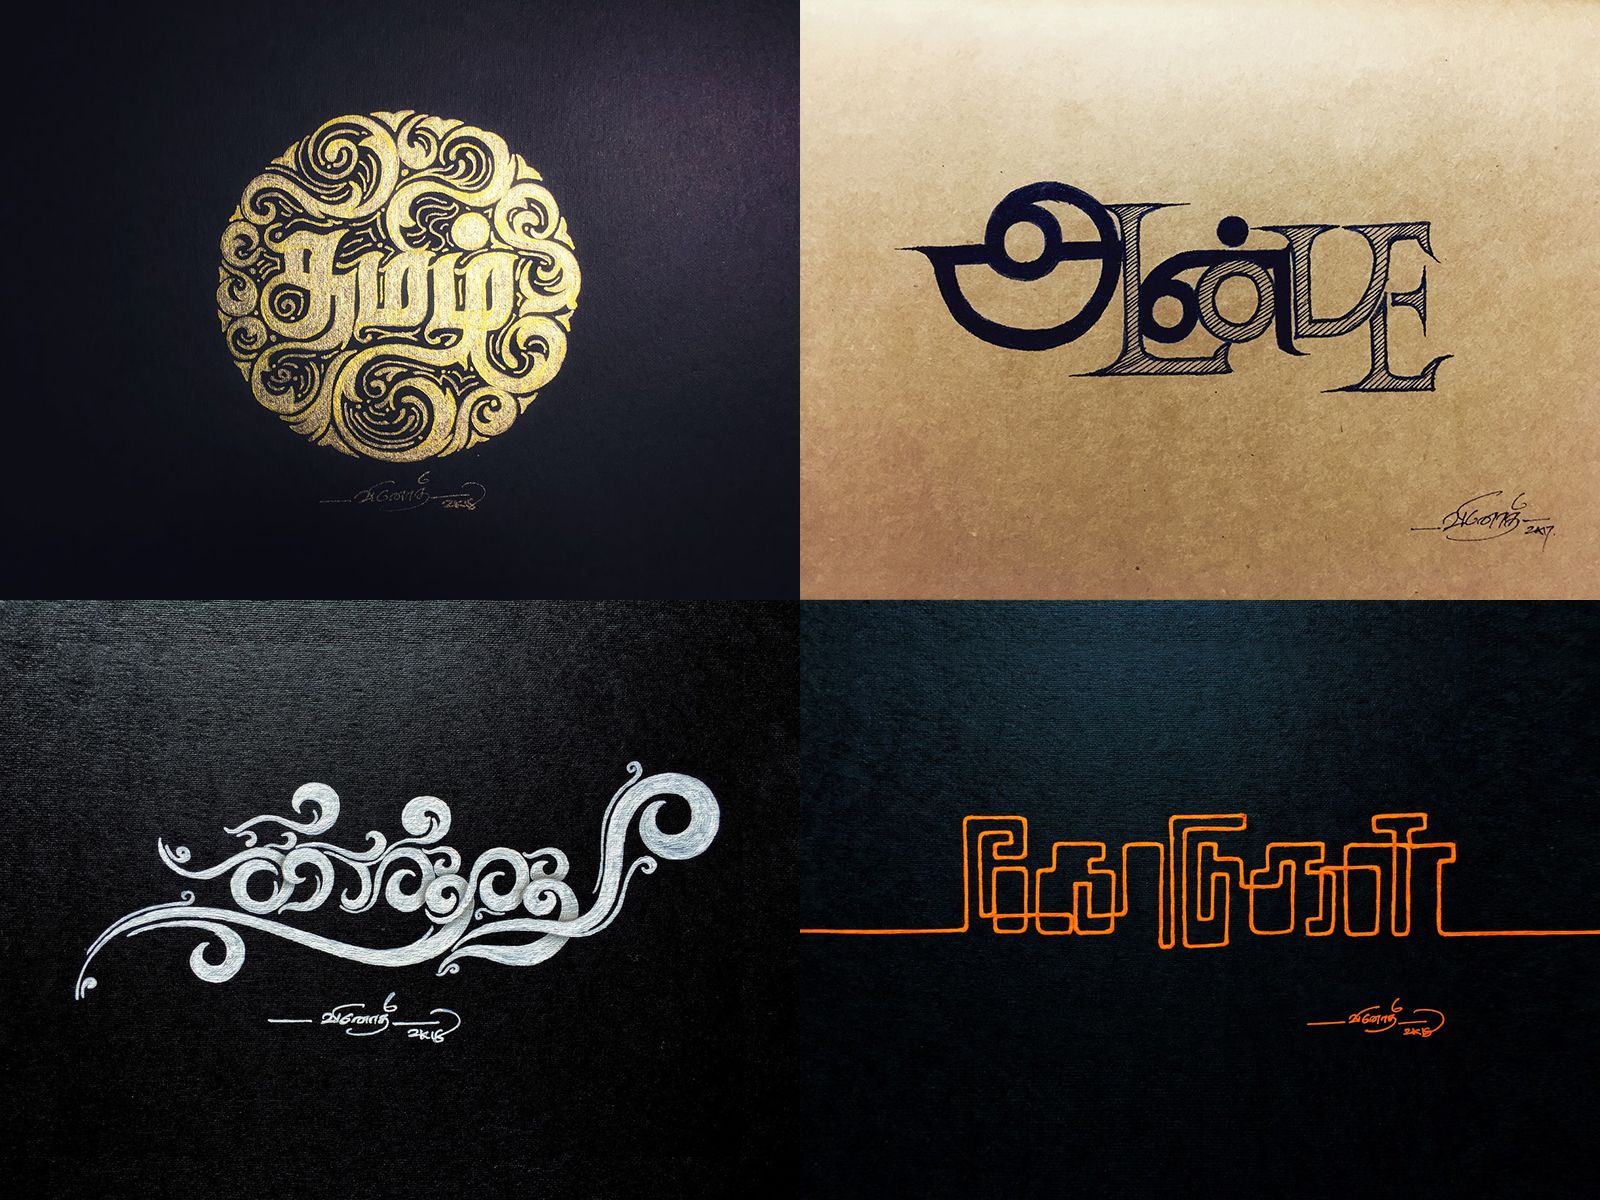 2018 Year in Review. Tamil typography, Lettering design, Tamil calligraphy